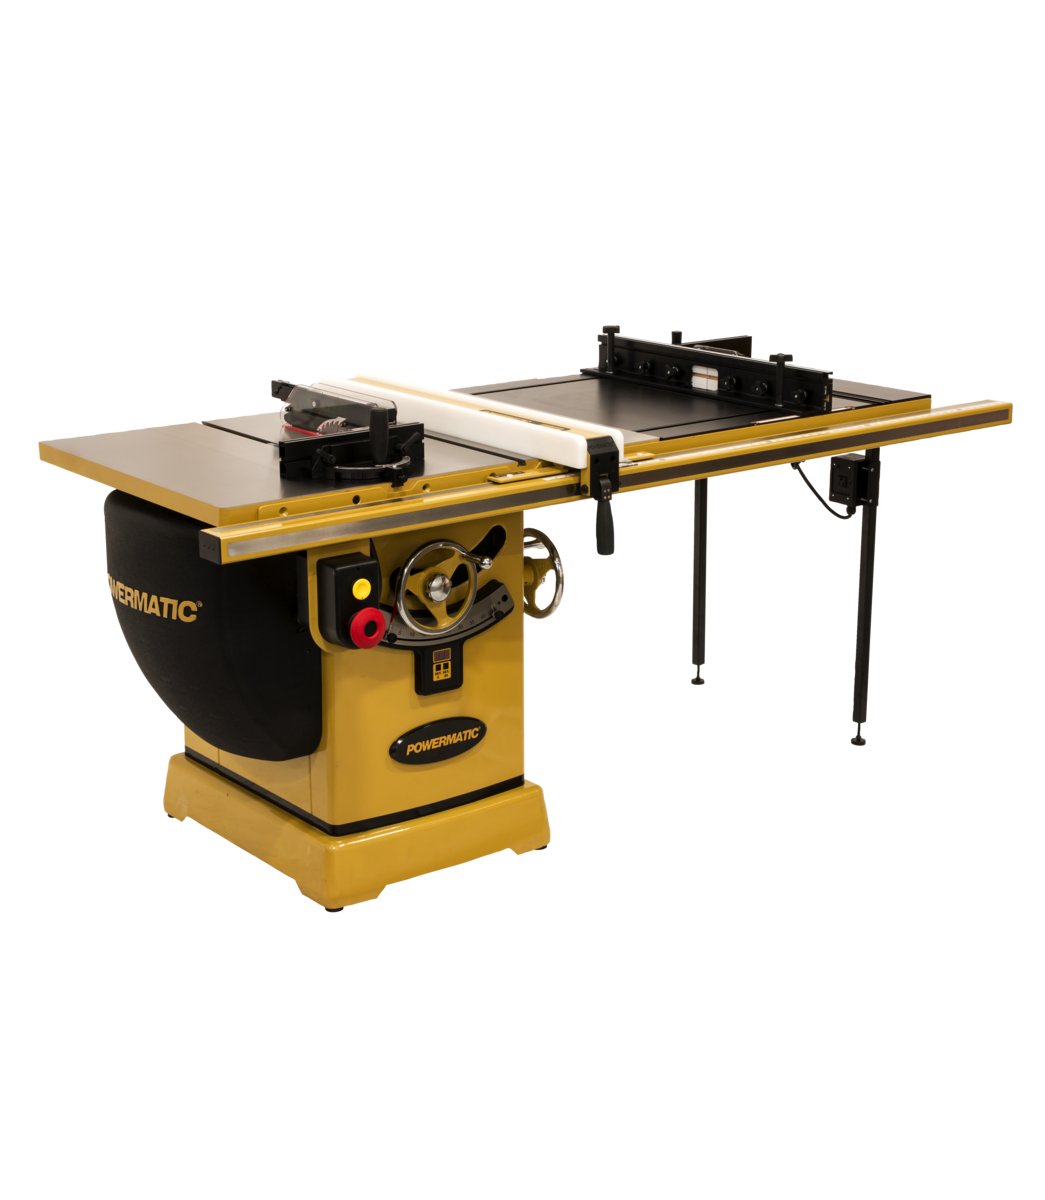 2000B Table Saw - 5HP 1PH 230V 50" RIP w/Accu-Fence & Router Lift - Diamond Tool Store